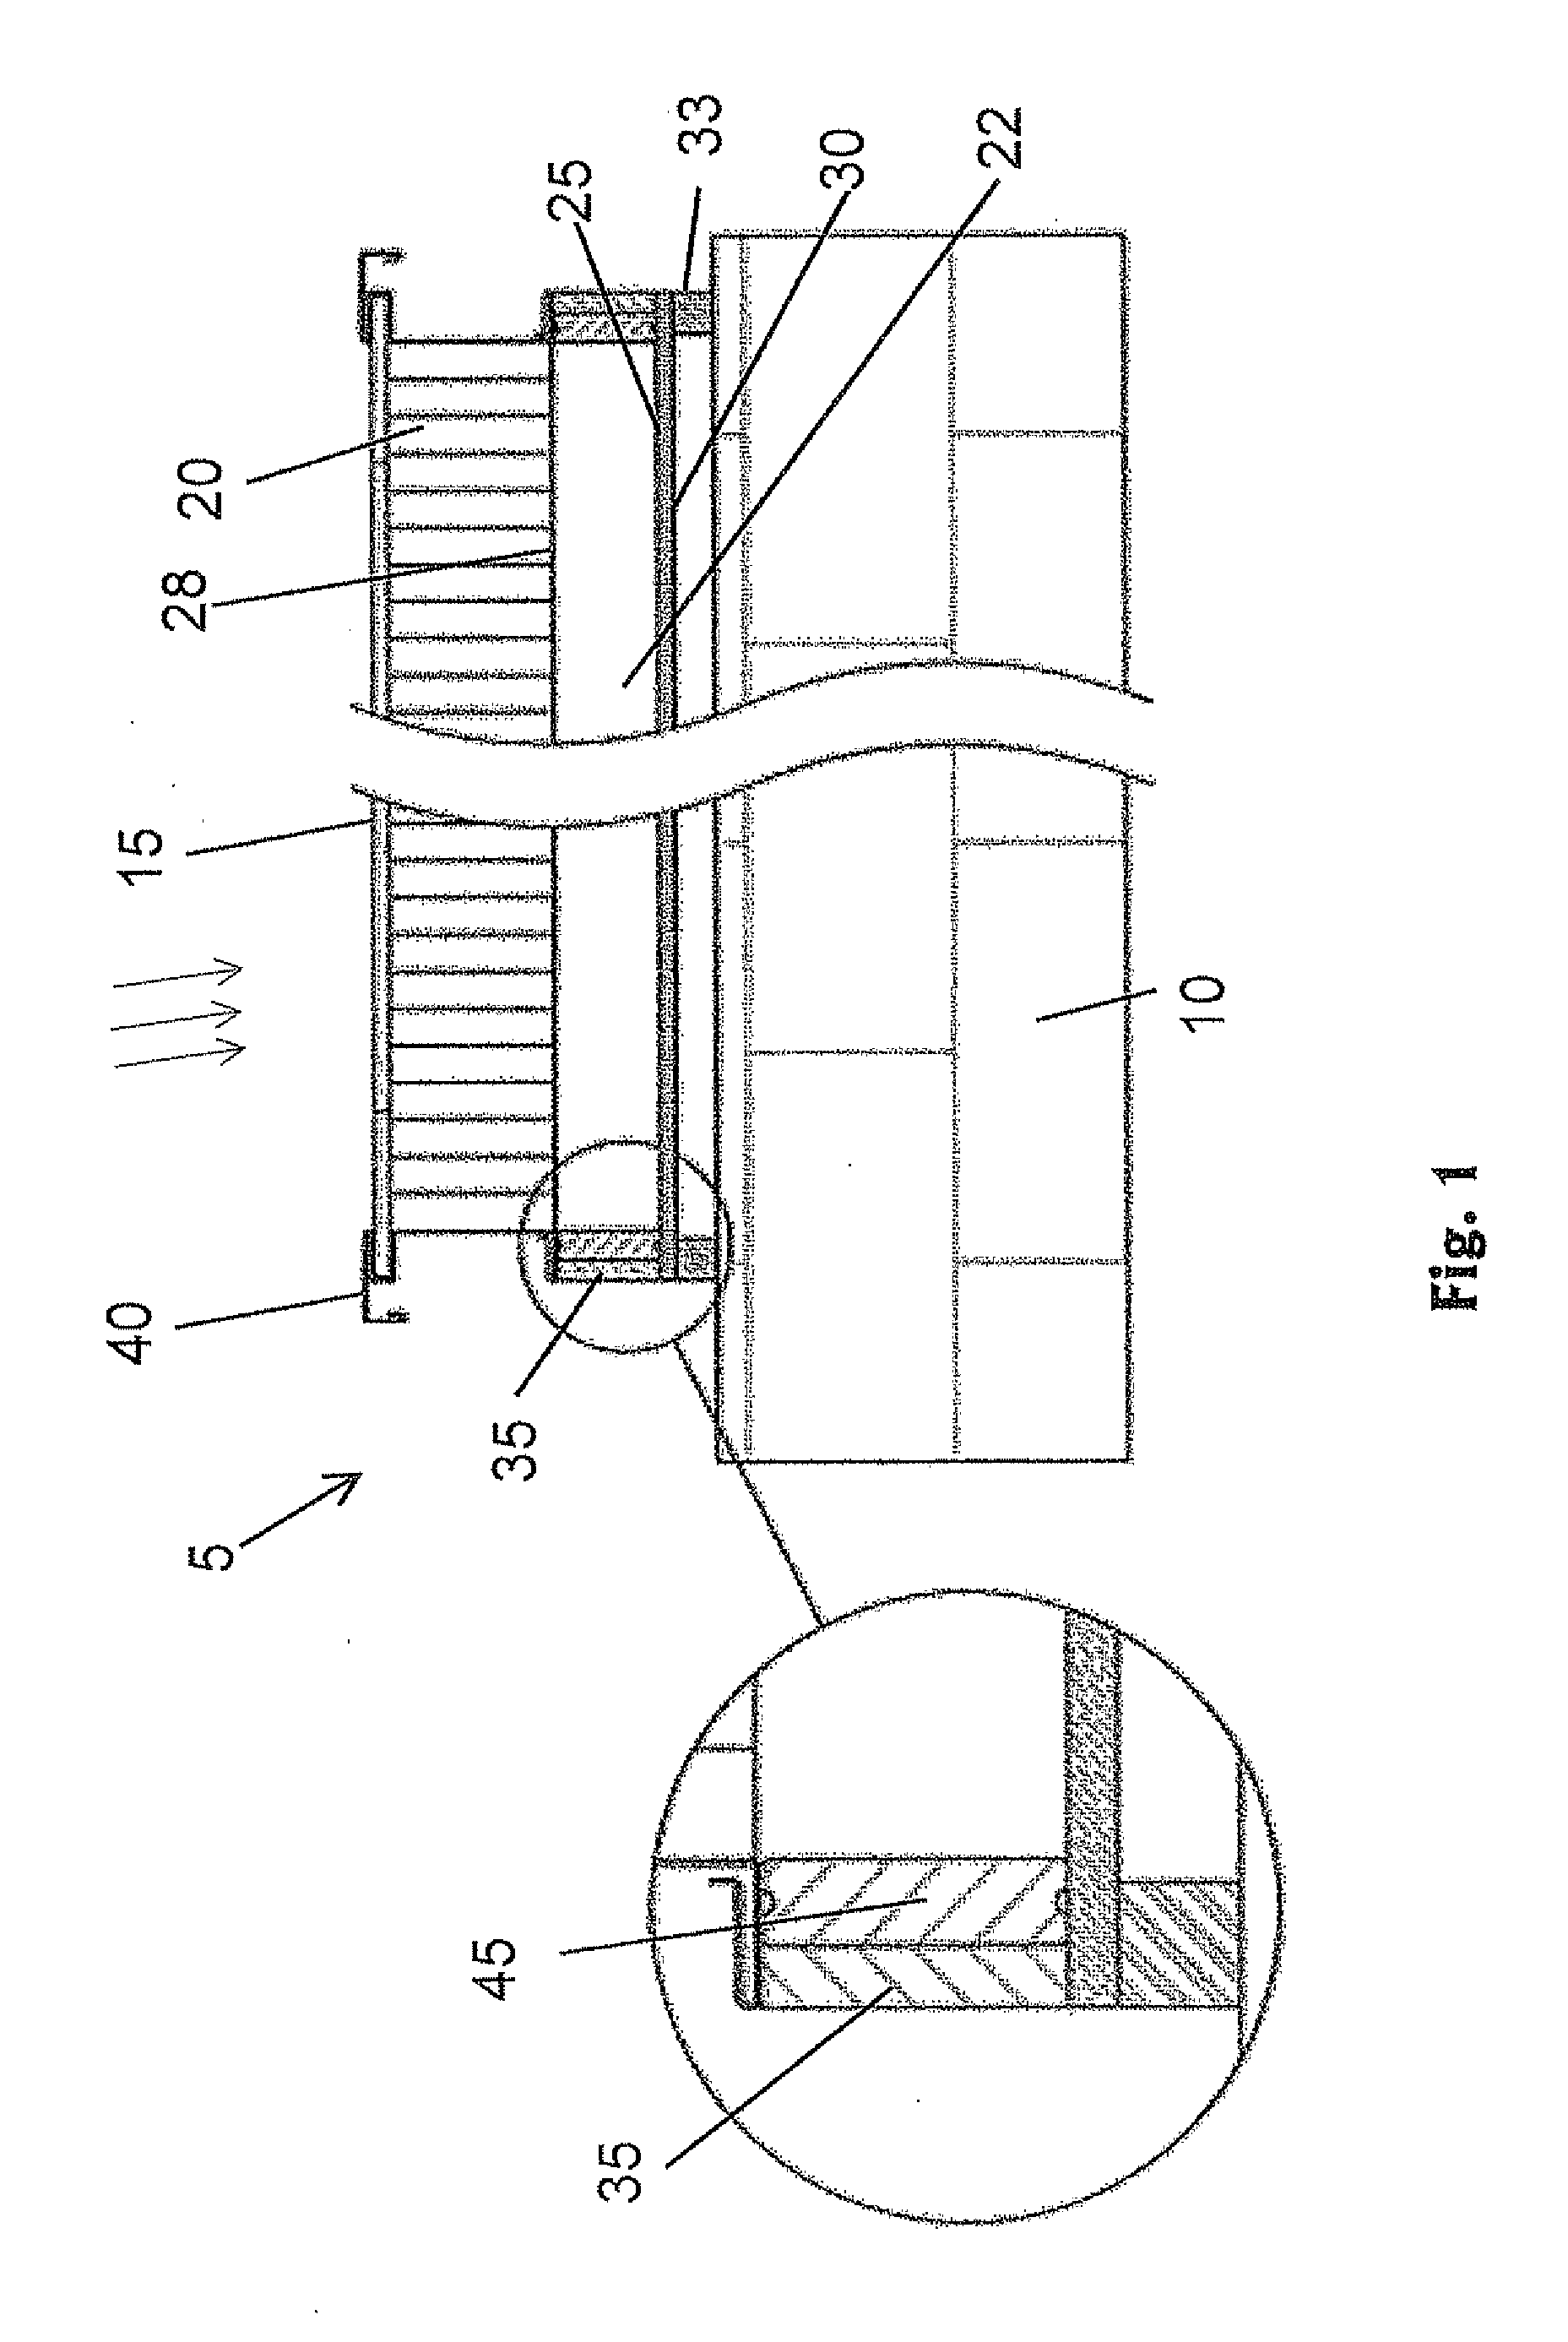 Solar thermal collecting system